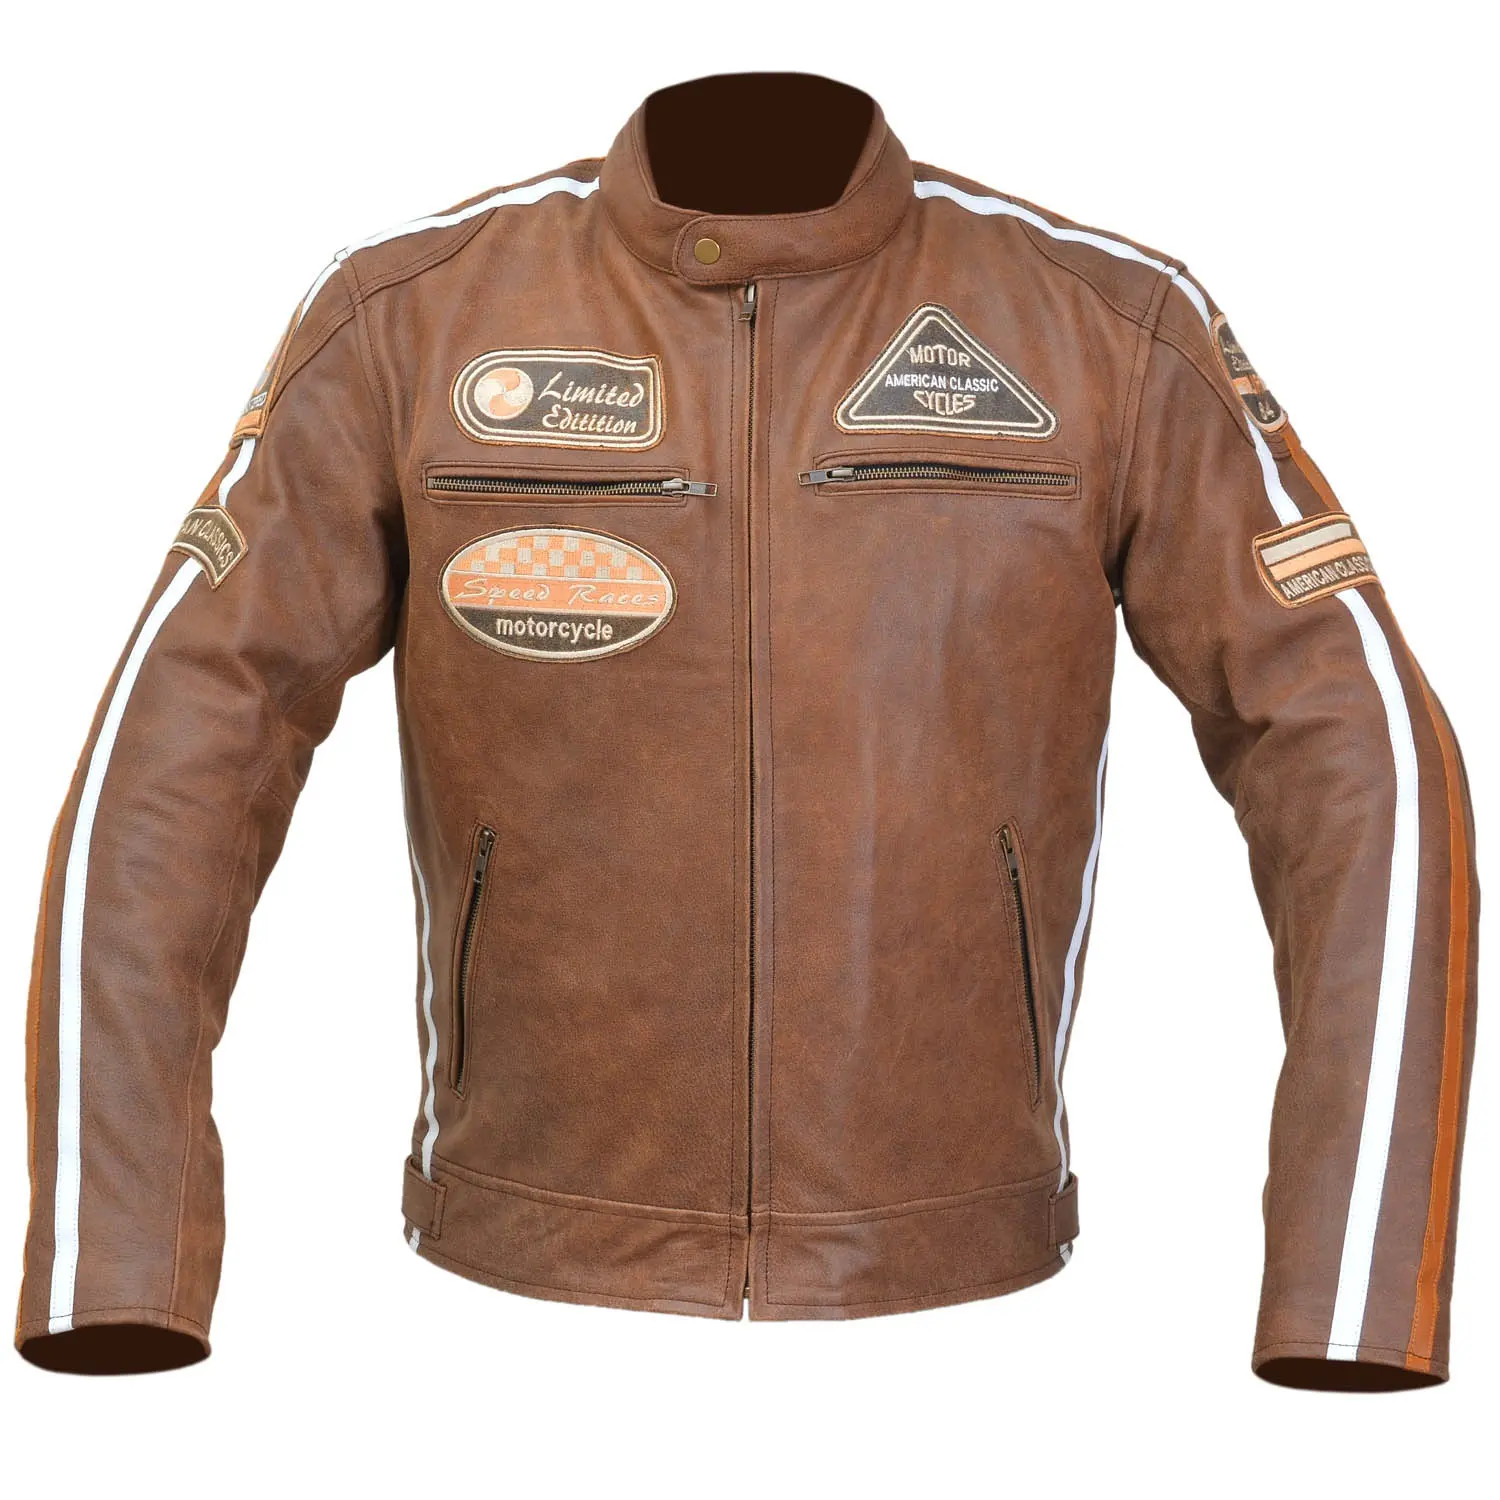 Fresh arrival High street Catchy and Edgy fully customized Bikers leather jacket cool premium quality Gracy look in the Genus.